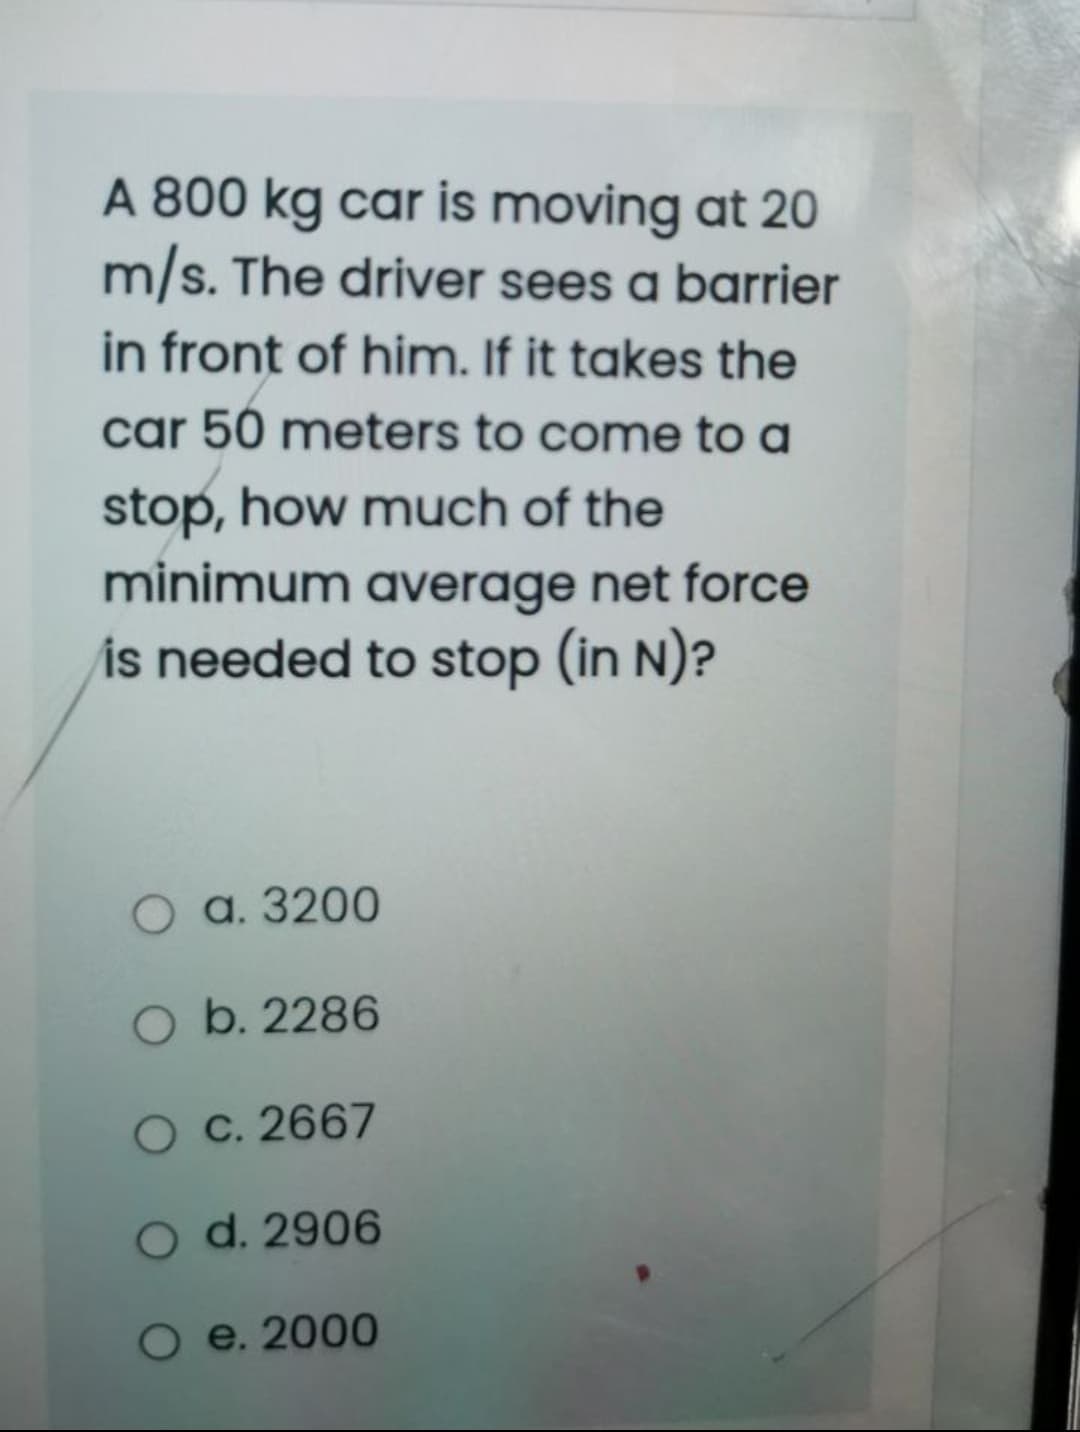 A 800 kg car is moving at 20
m/s. The driver sees a barrier
in front of him. If it takes the
car 50 meters to come to a
stop, how much of the
minimum average net force
is needed to stop (in N)?
О а. 3200
O b. 2286
O C. 2667
O d. 2906
O e. 2000
